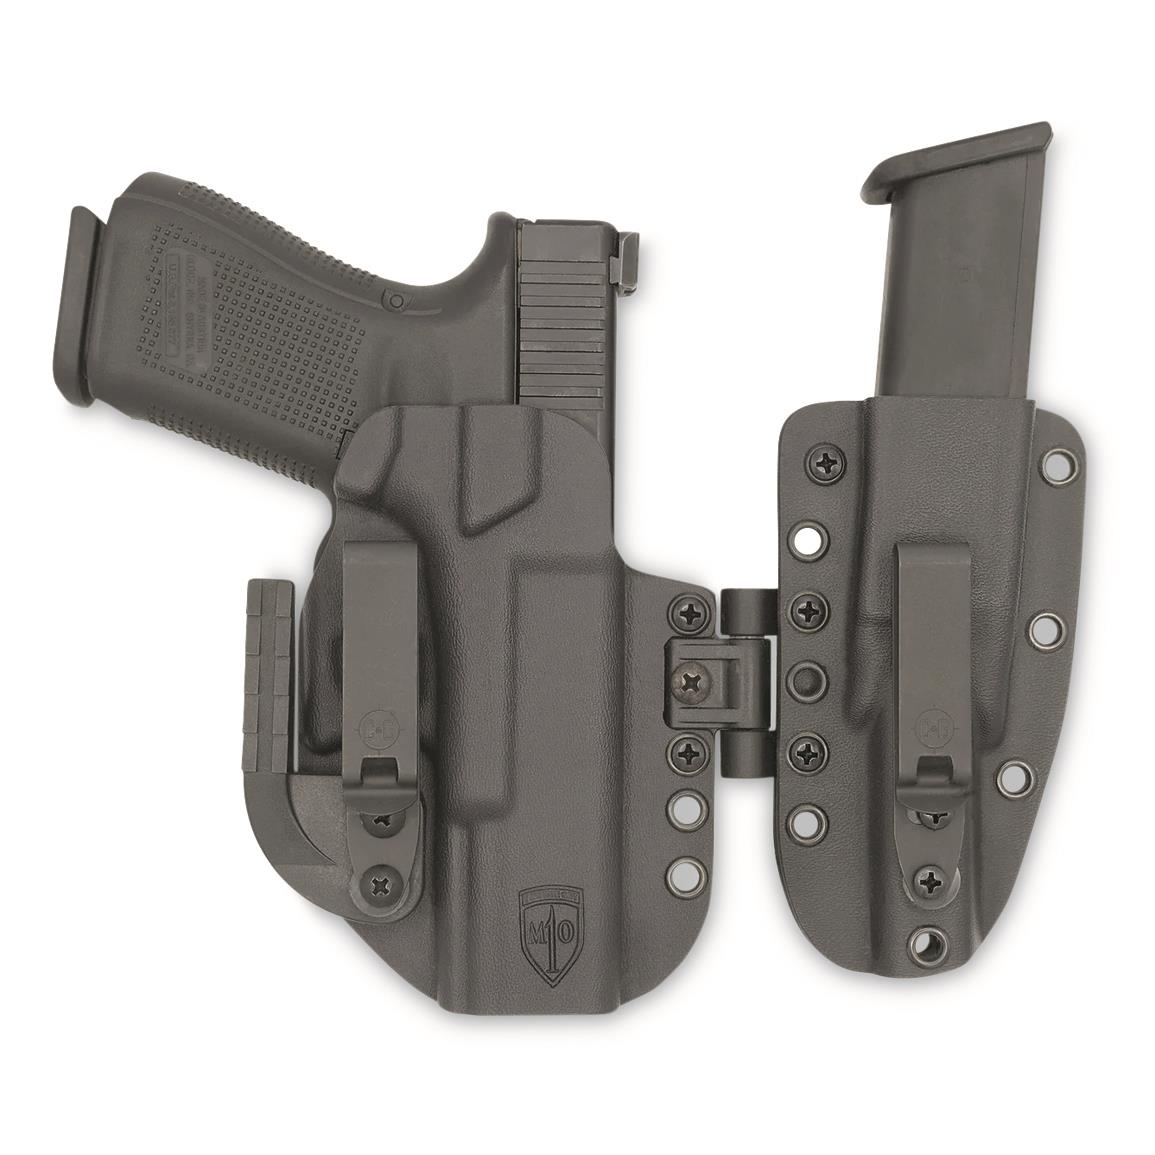 C&G Holsters MOD1-Lima IWB Kydex Holster System, SIG SAUER P320 w/Streamlight TLR-7